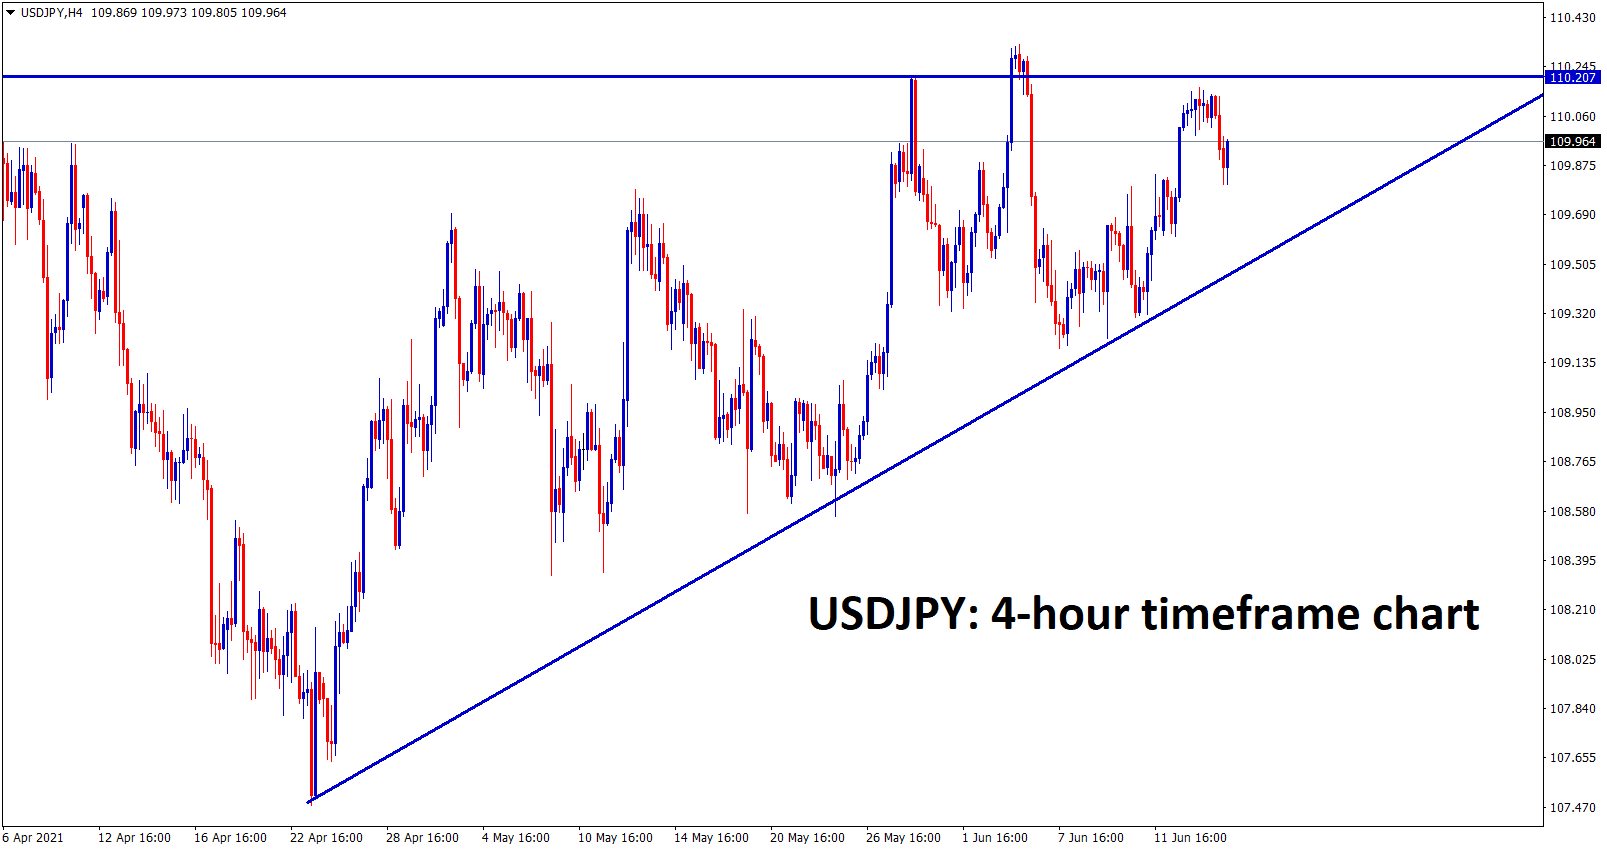 USDJPY moving in an Ascending Triangle pattern